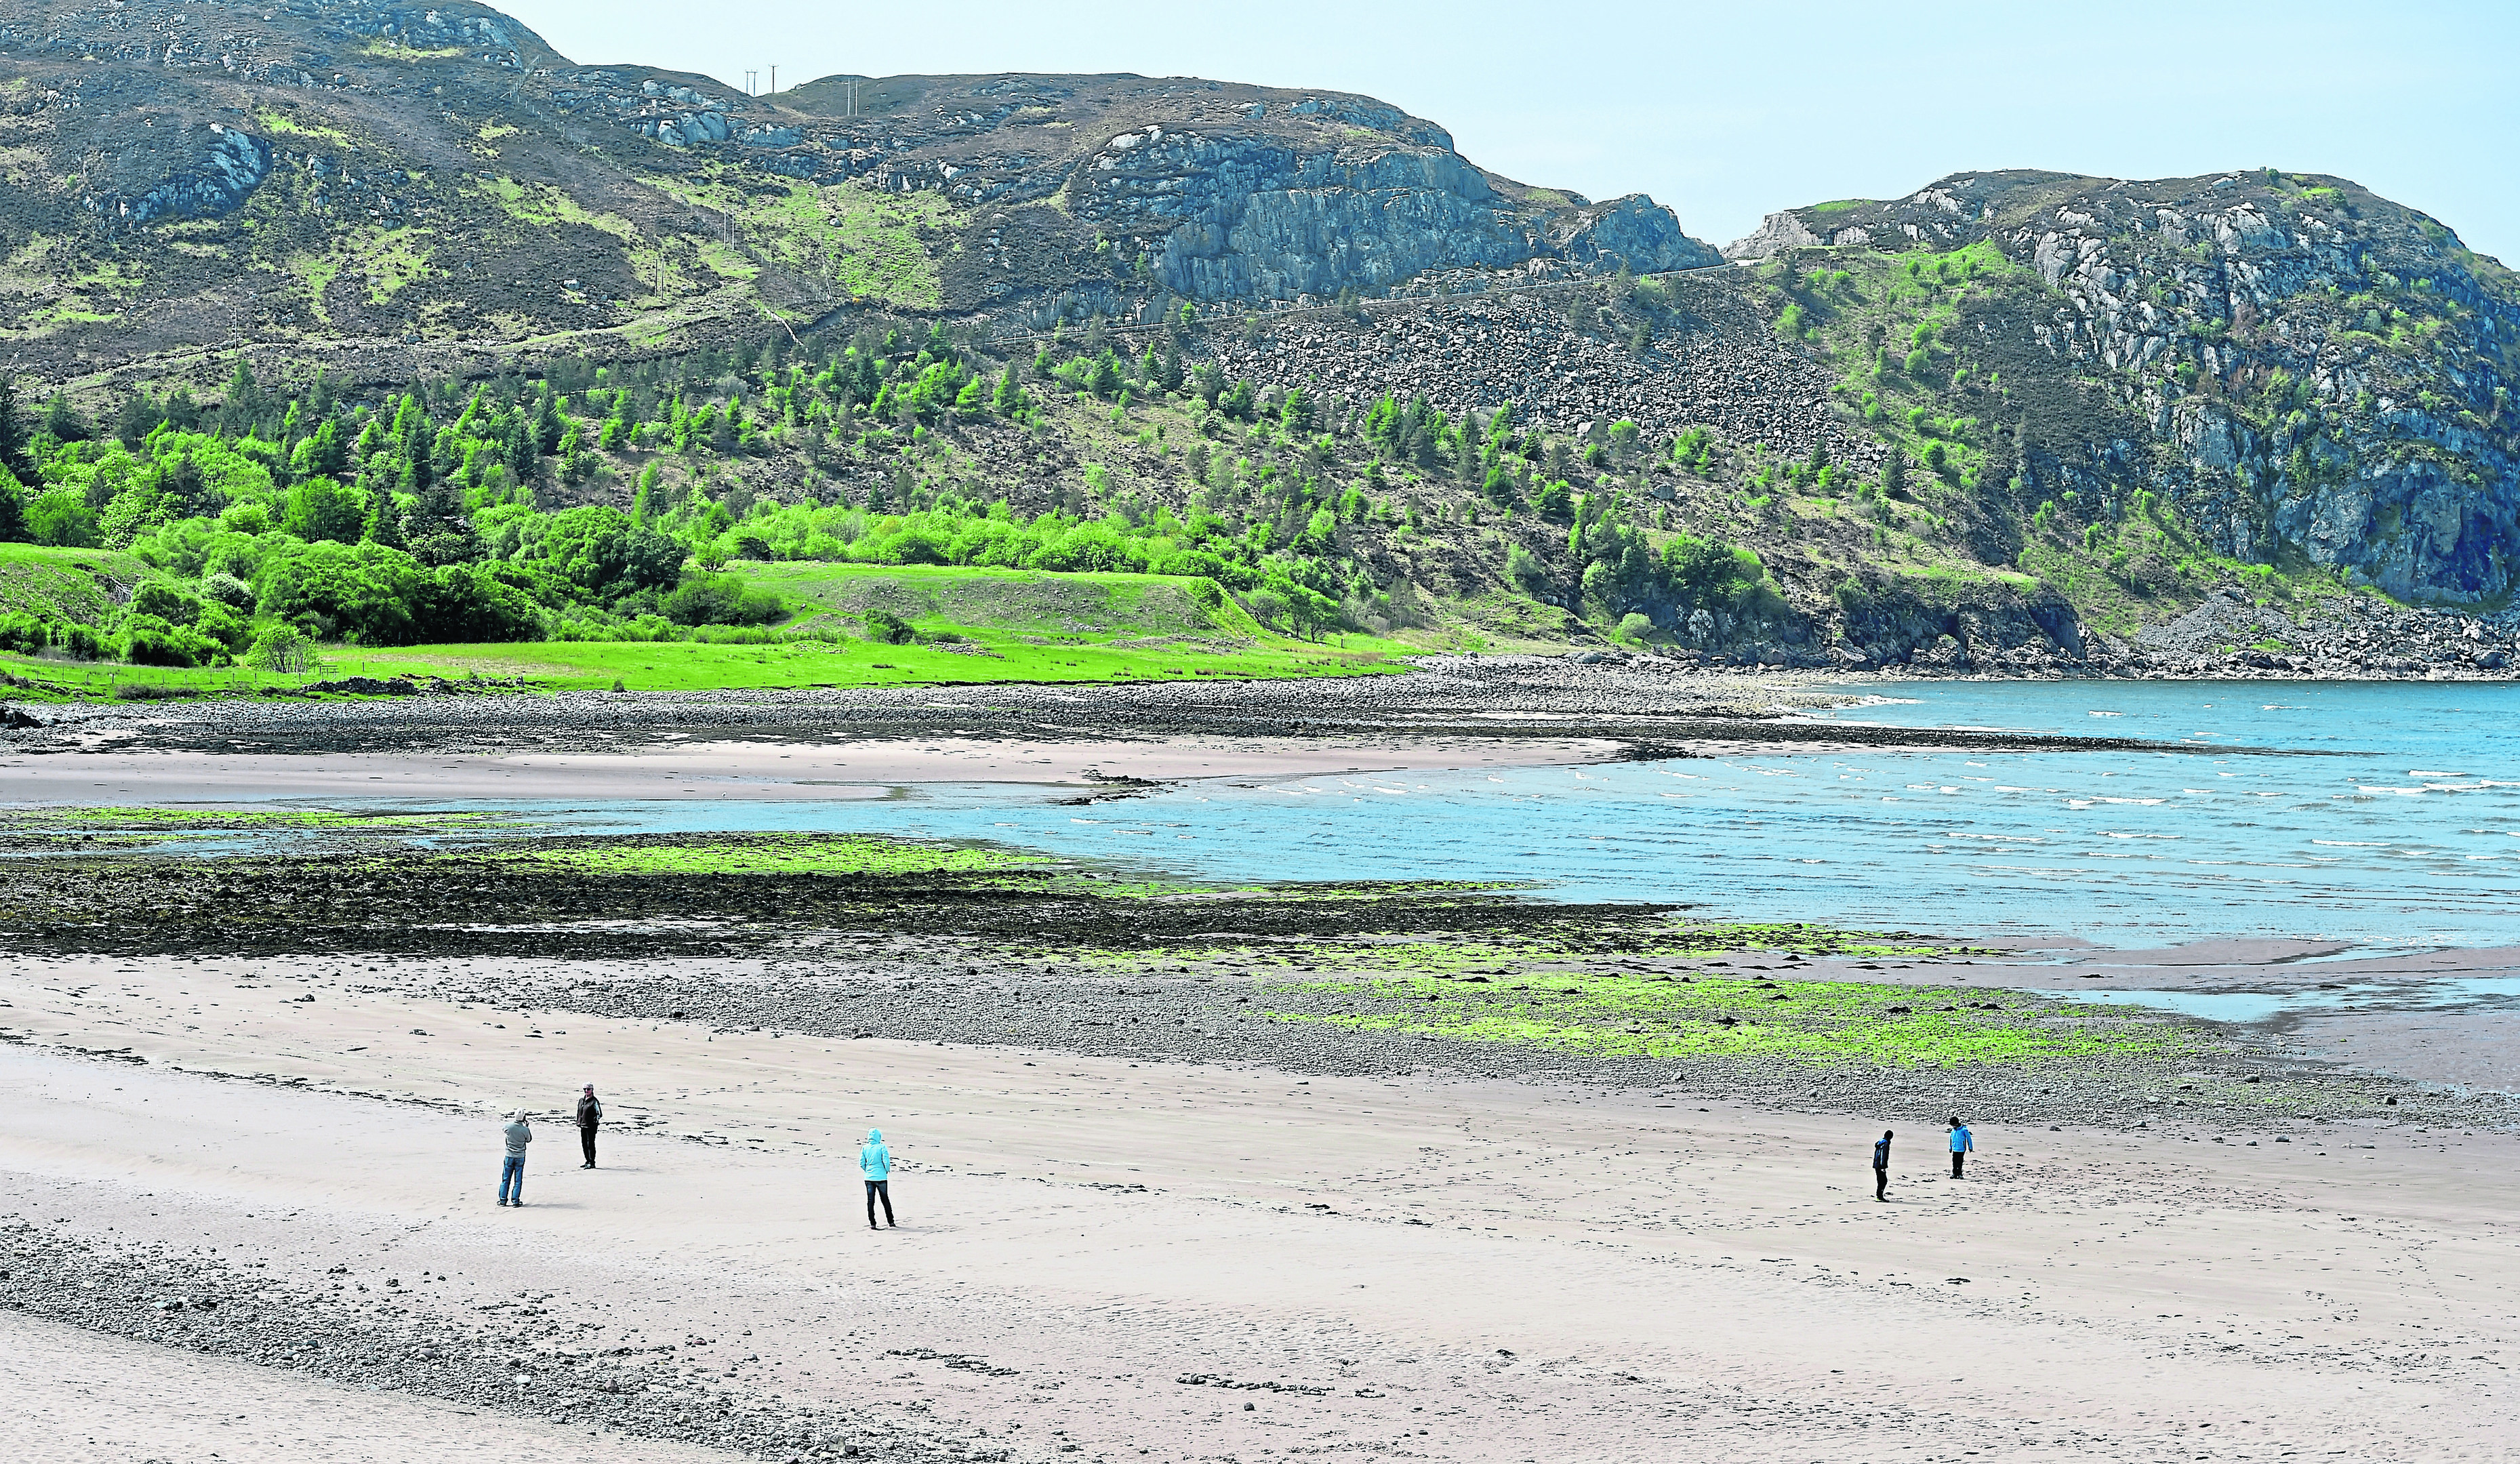 Walkers enjoy the warm weather while exploring Gruinard Bay in Wester Ross.